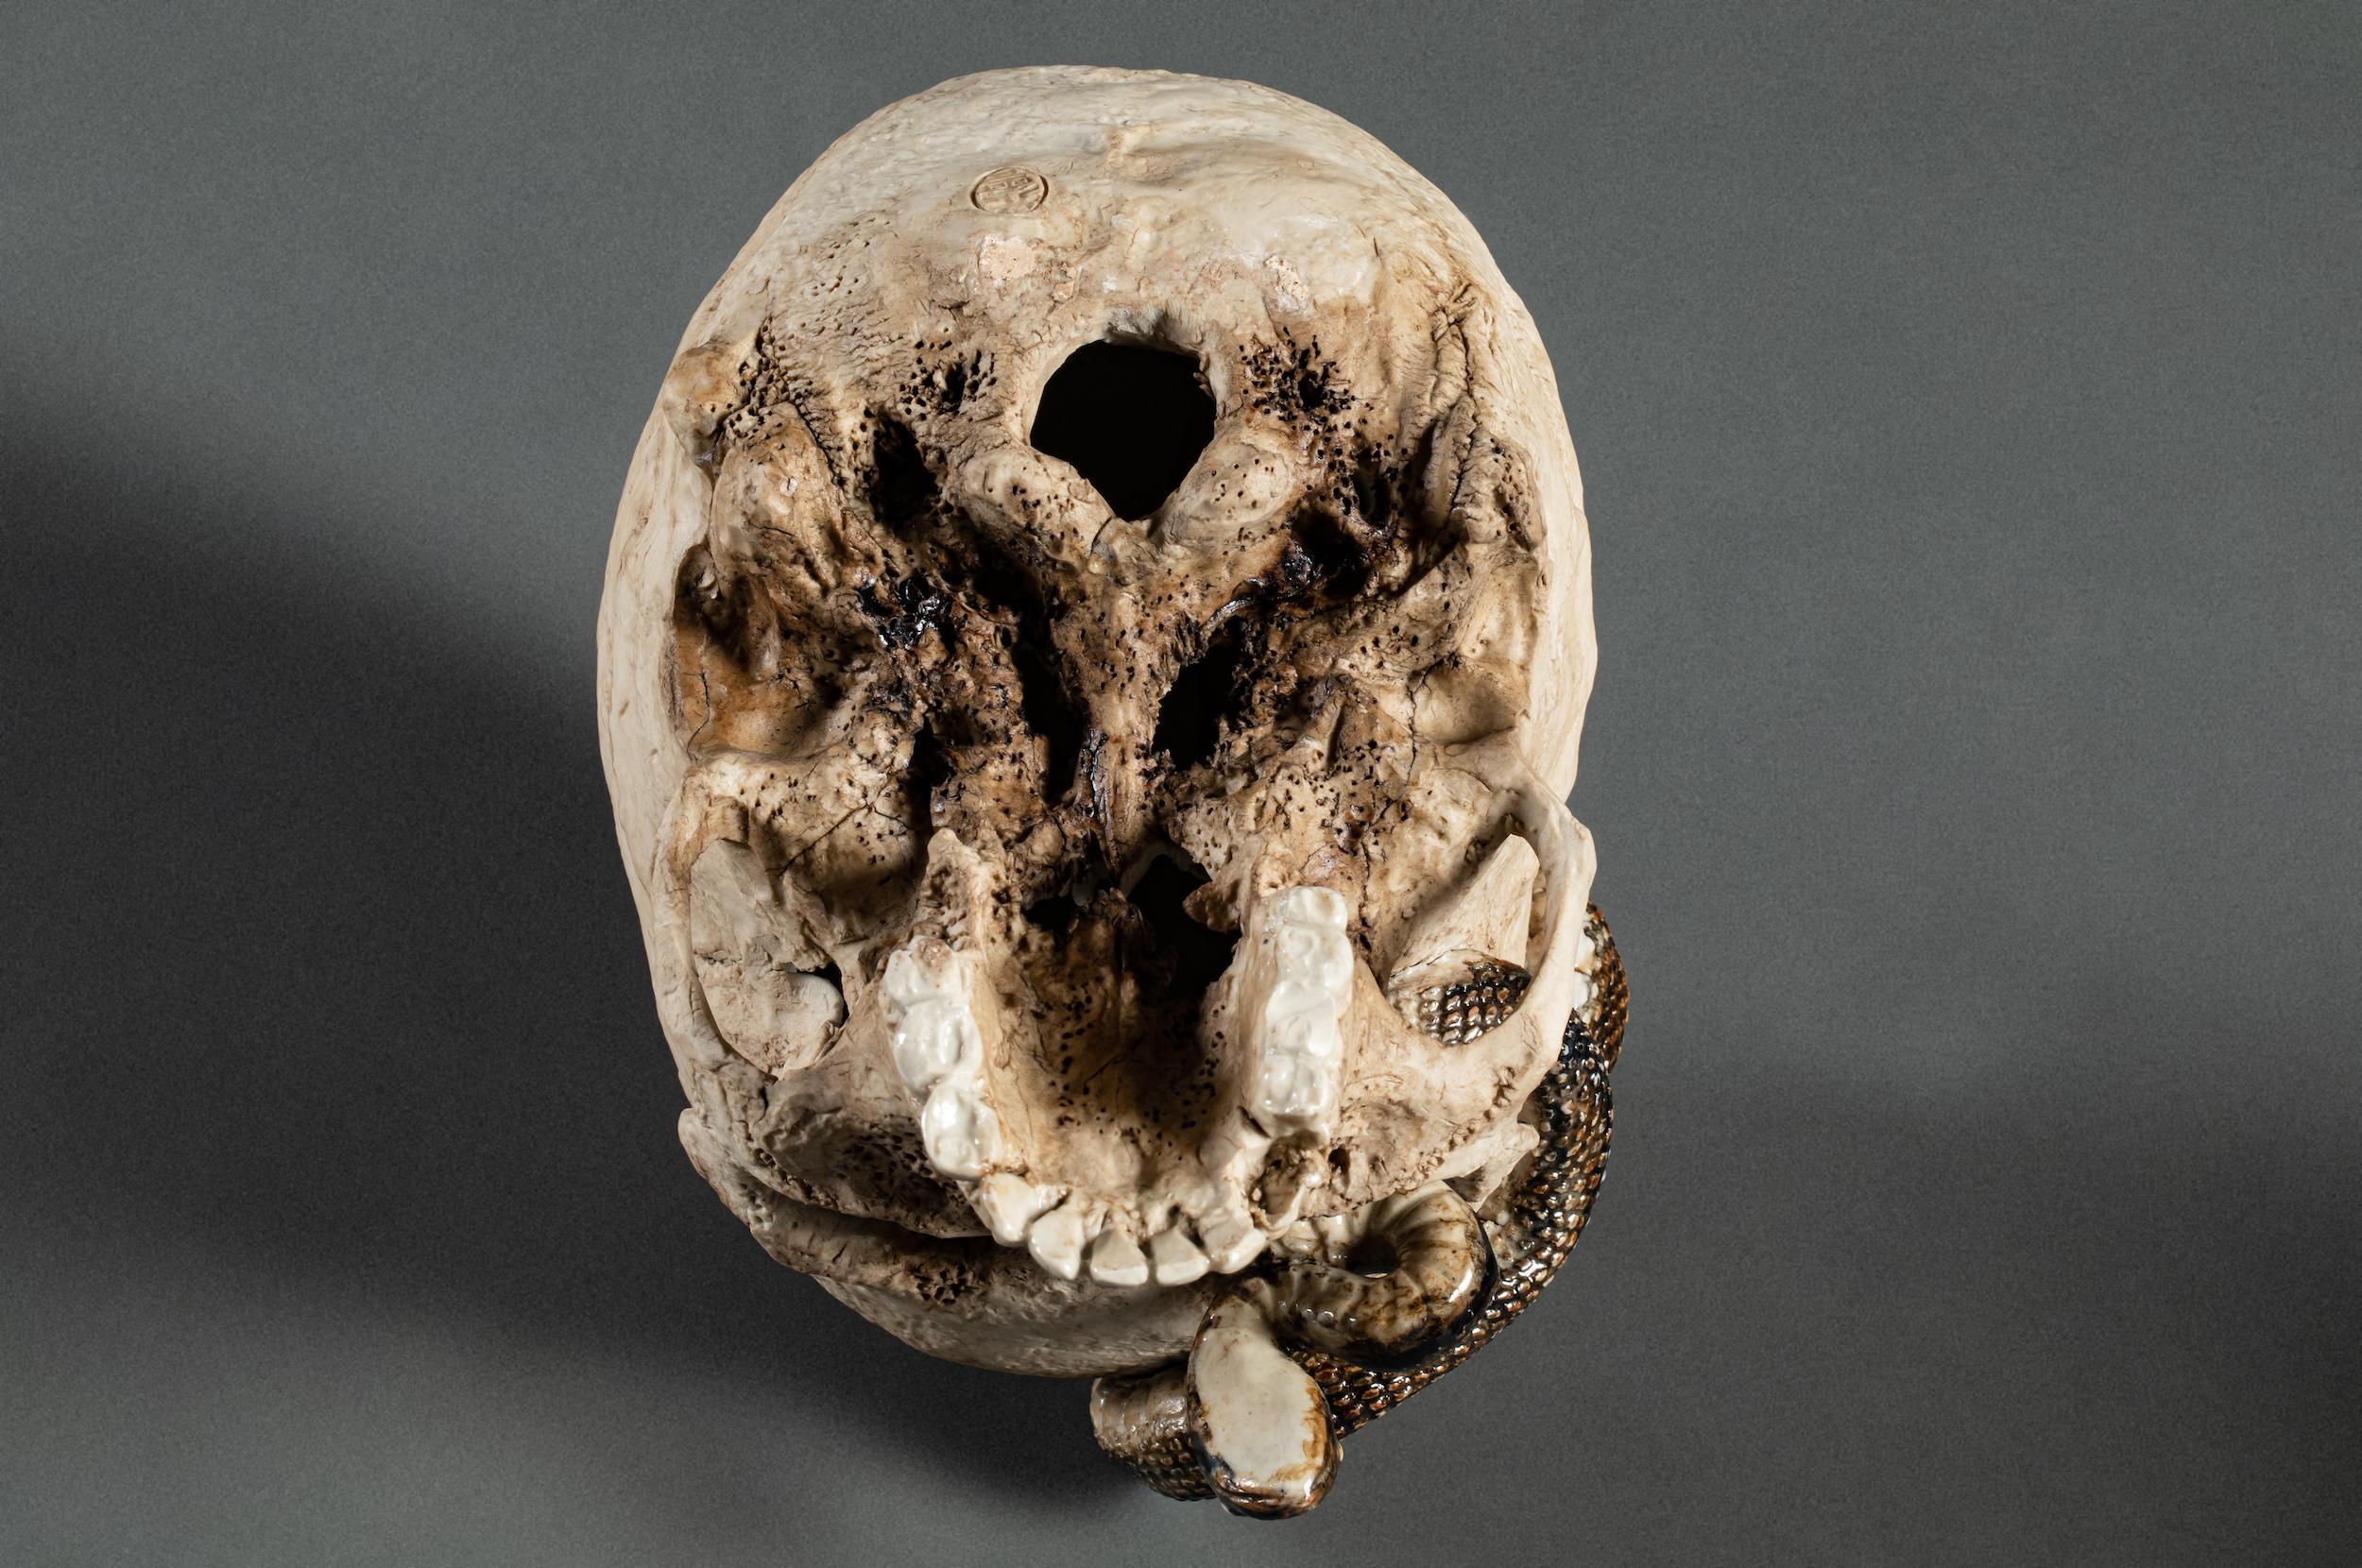 Japanese Ceramic Form of a Human Skull with a Snake For Sale 8